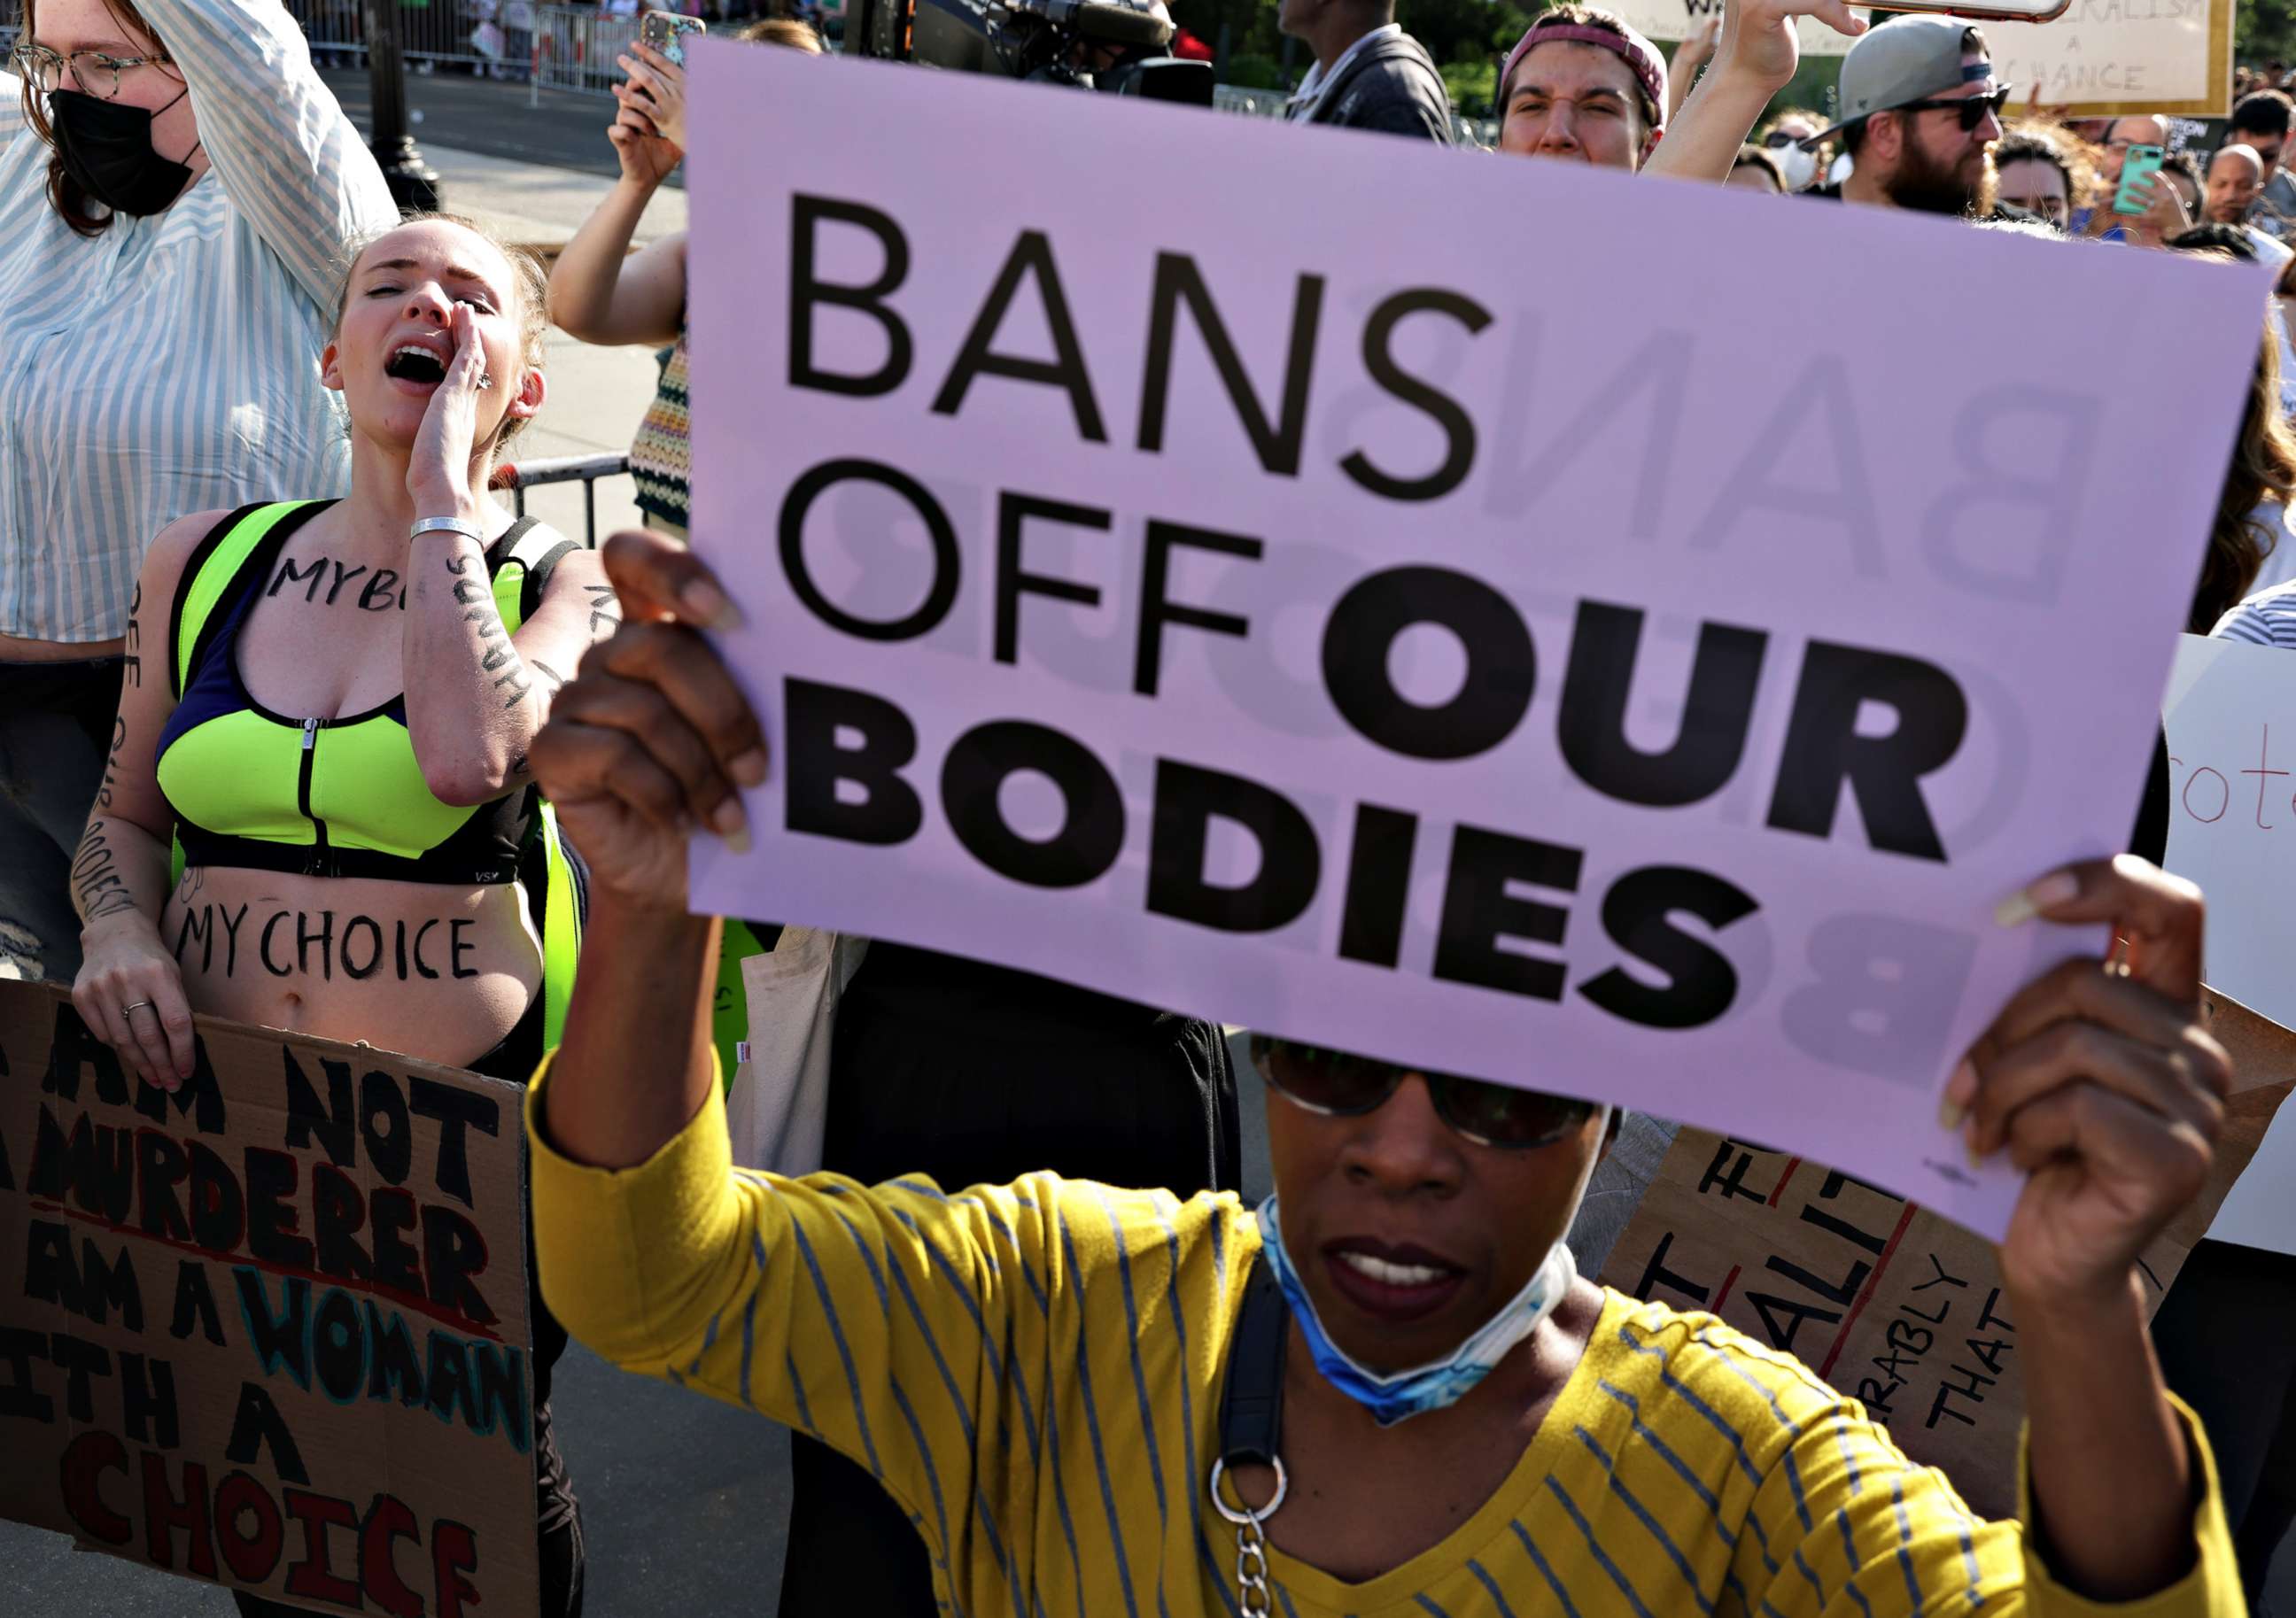 Why abortion restrictions disproportionately impact people of color